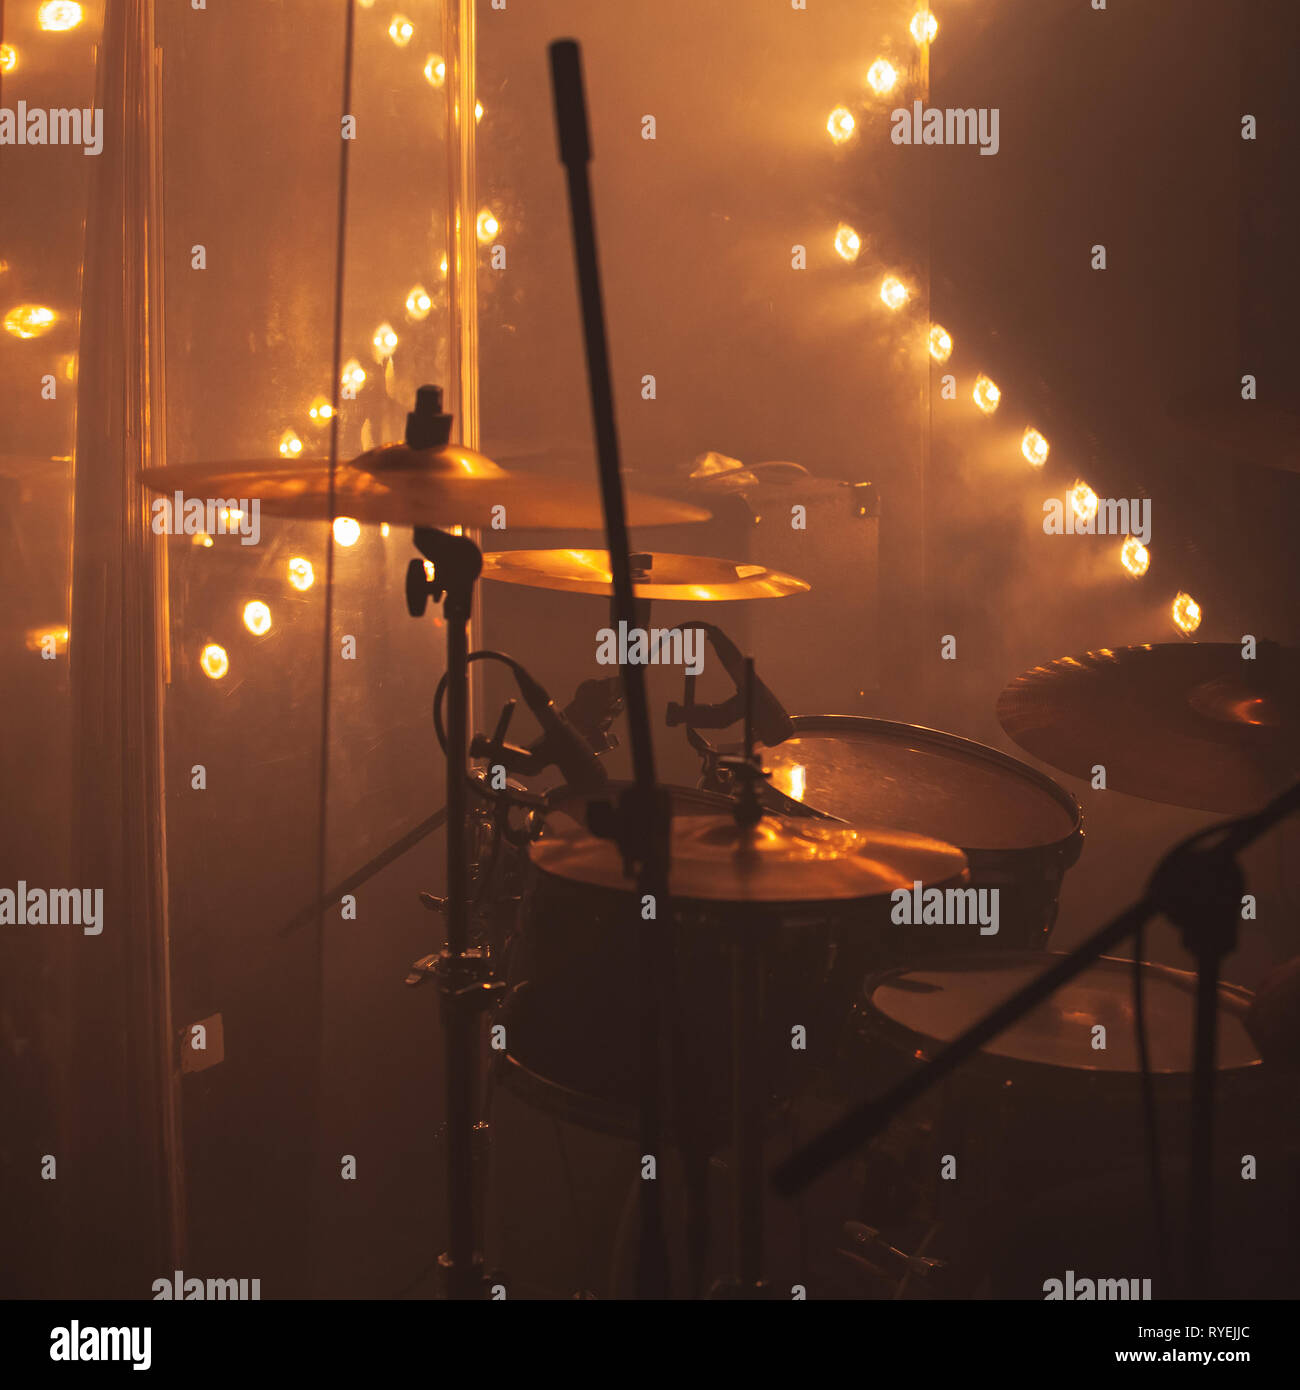 Live music square photo, rock band drum set with cymbals Stock Photo